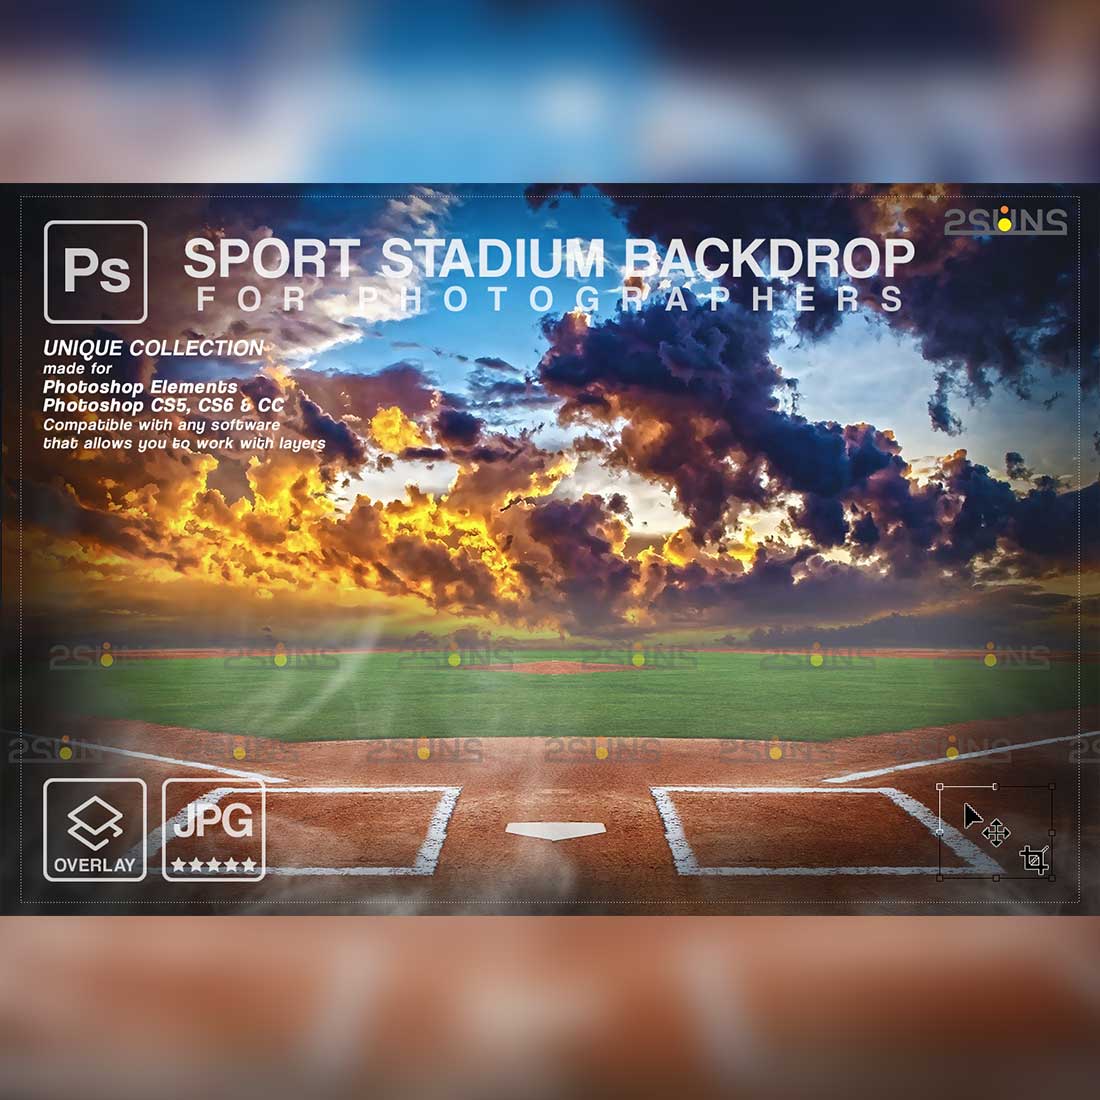 Amazing Softball Backdrop Sports Digital Background Preview Image.